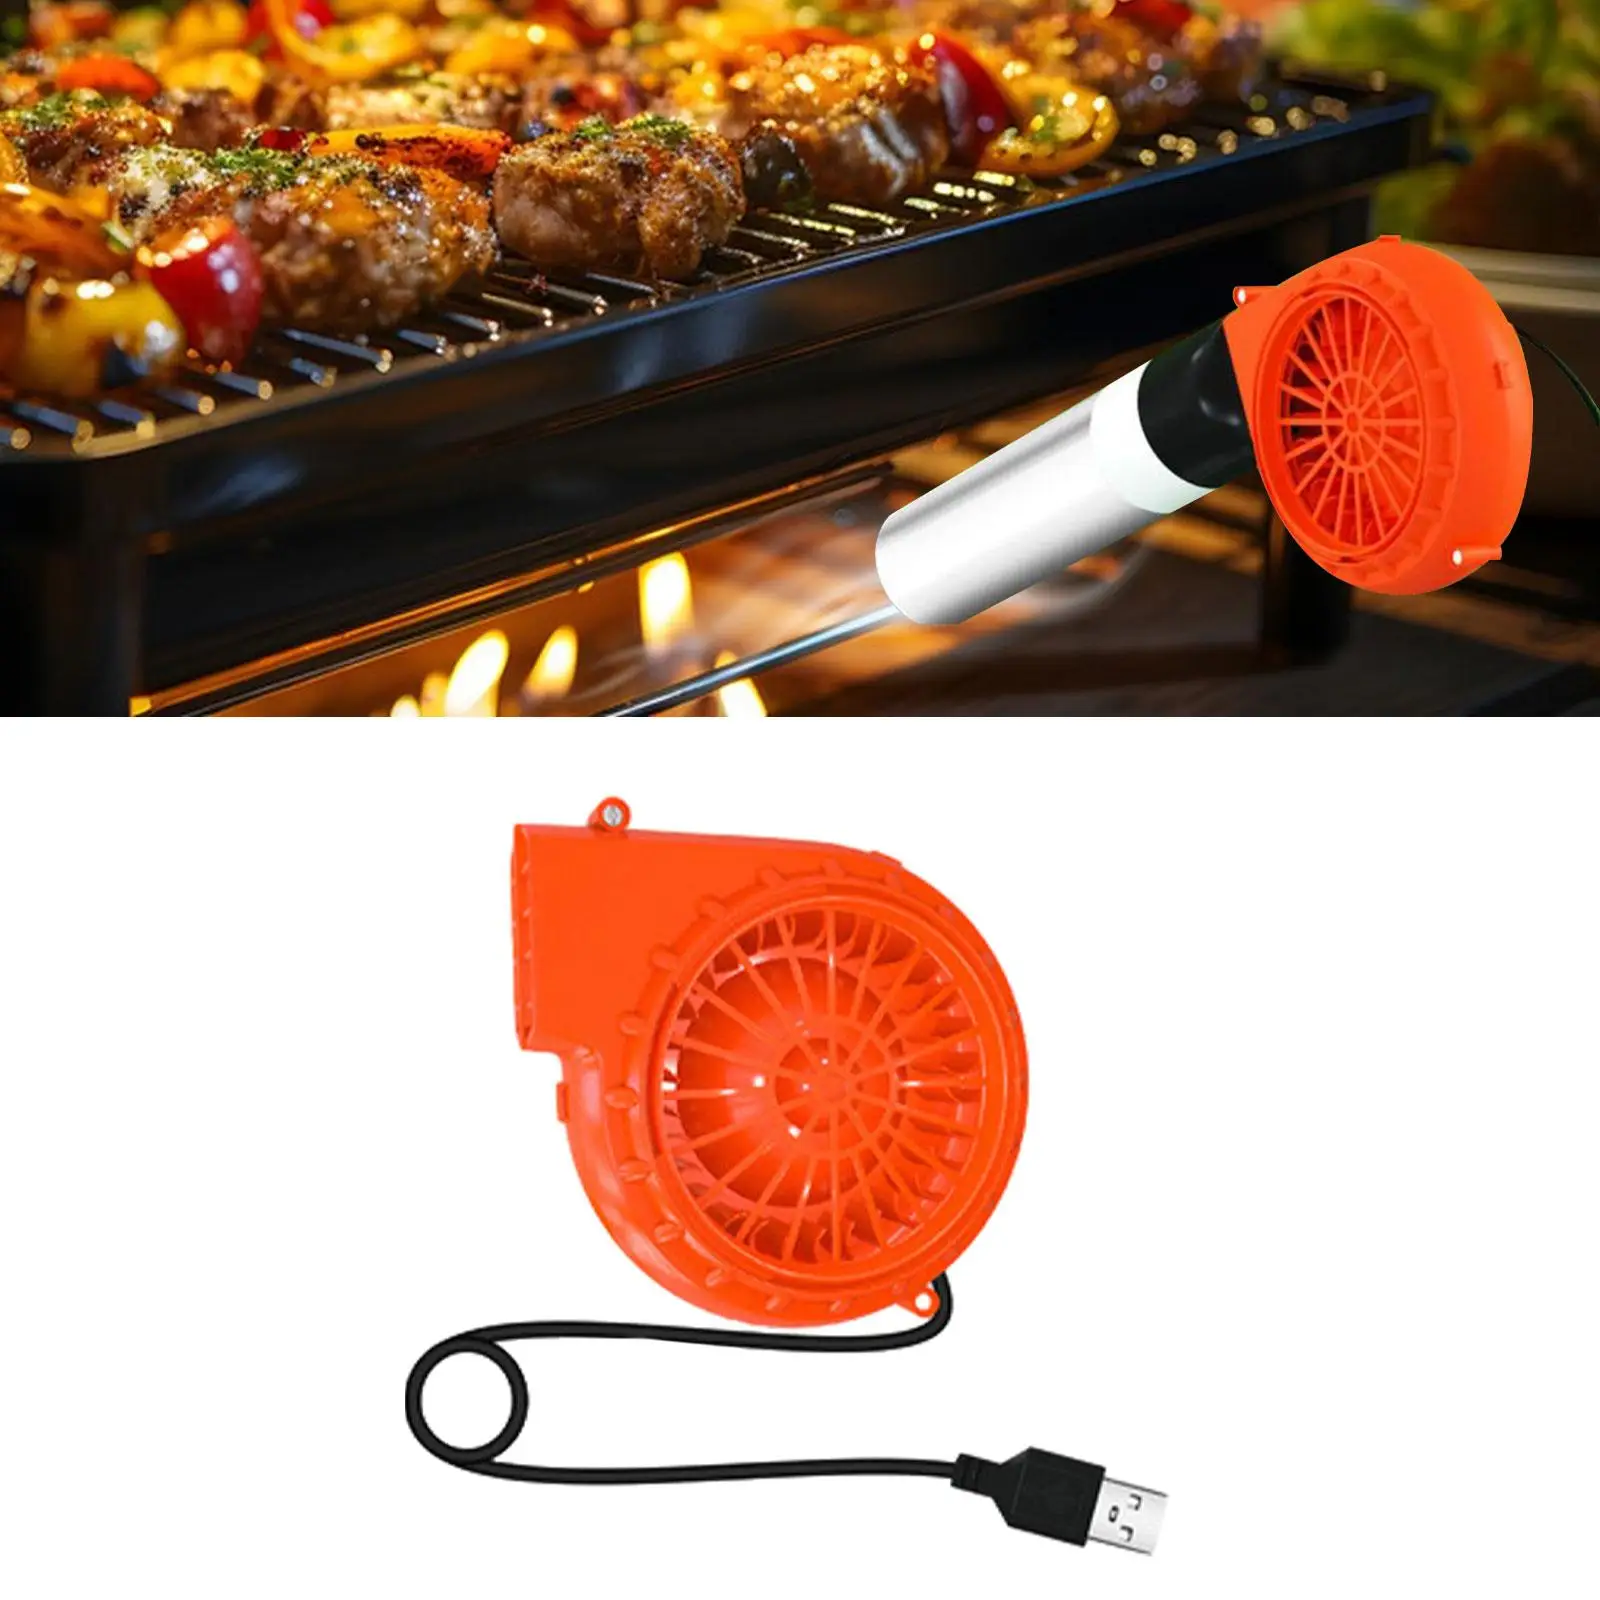 USB BBQ Air Blower, Barbecue Air Blower, Handheld, Small, Compact Grill Cooking Fan, Electric Blower for Picnic